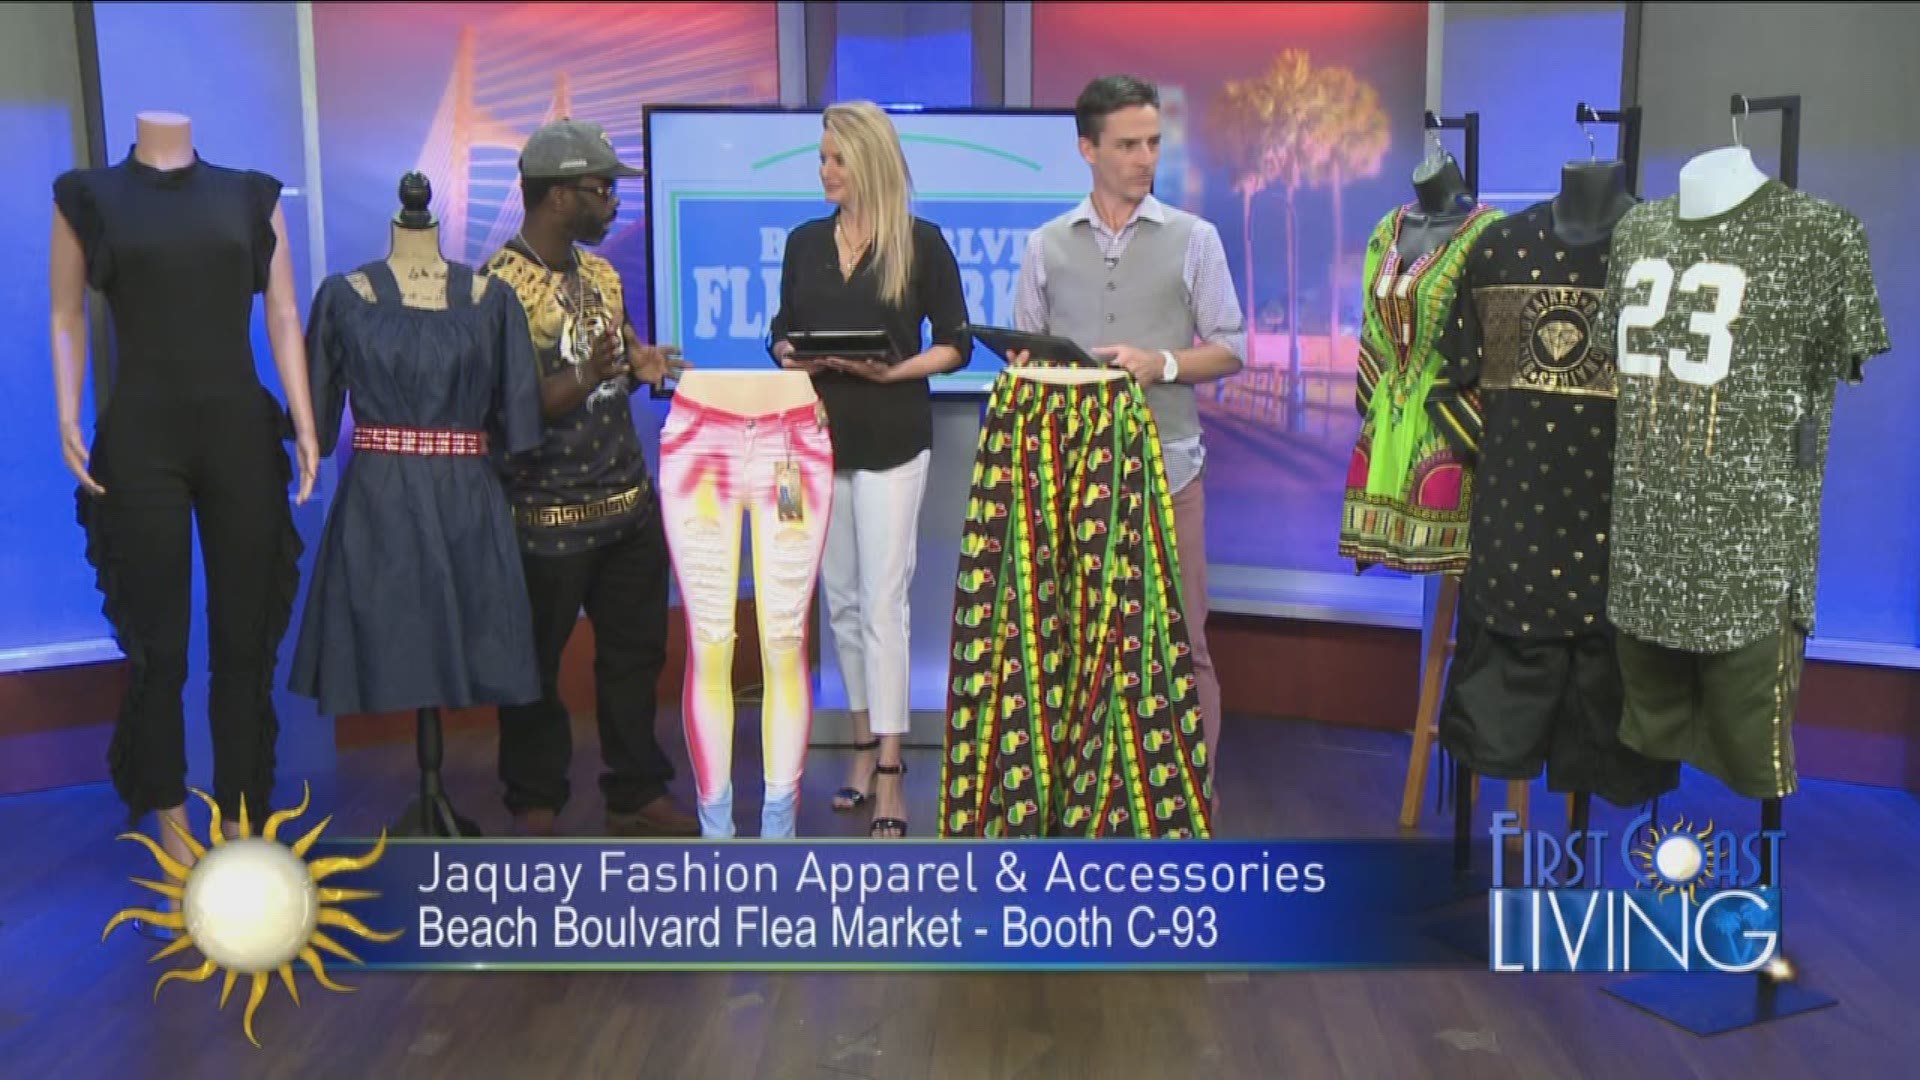 Jaquay Fashion Apparel and Accressories